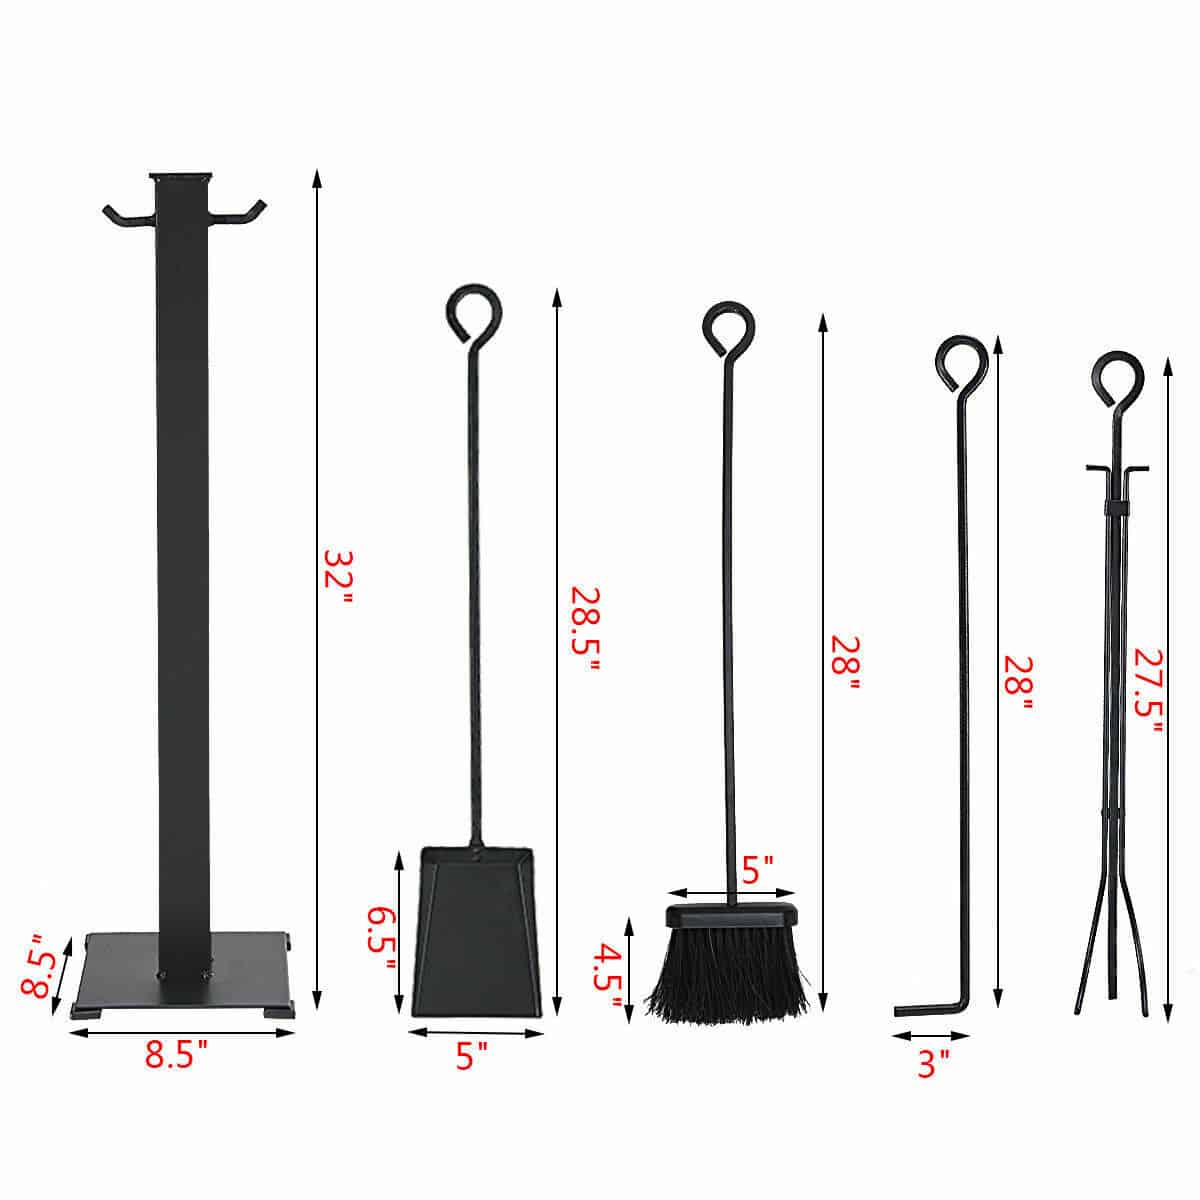 Topbuy 5pc Iron Fire Place Tool set Fireplace Tools Set Stand Hearth ...